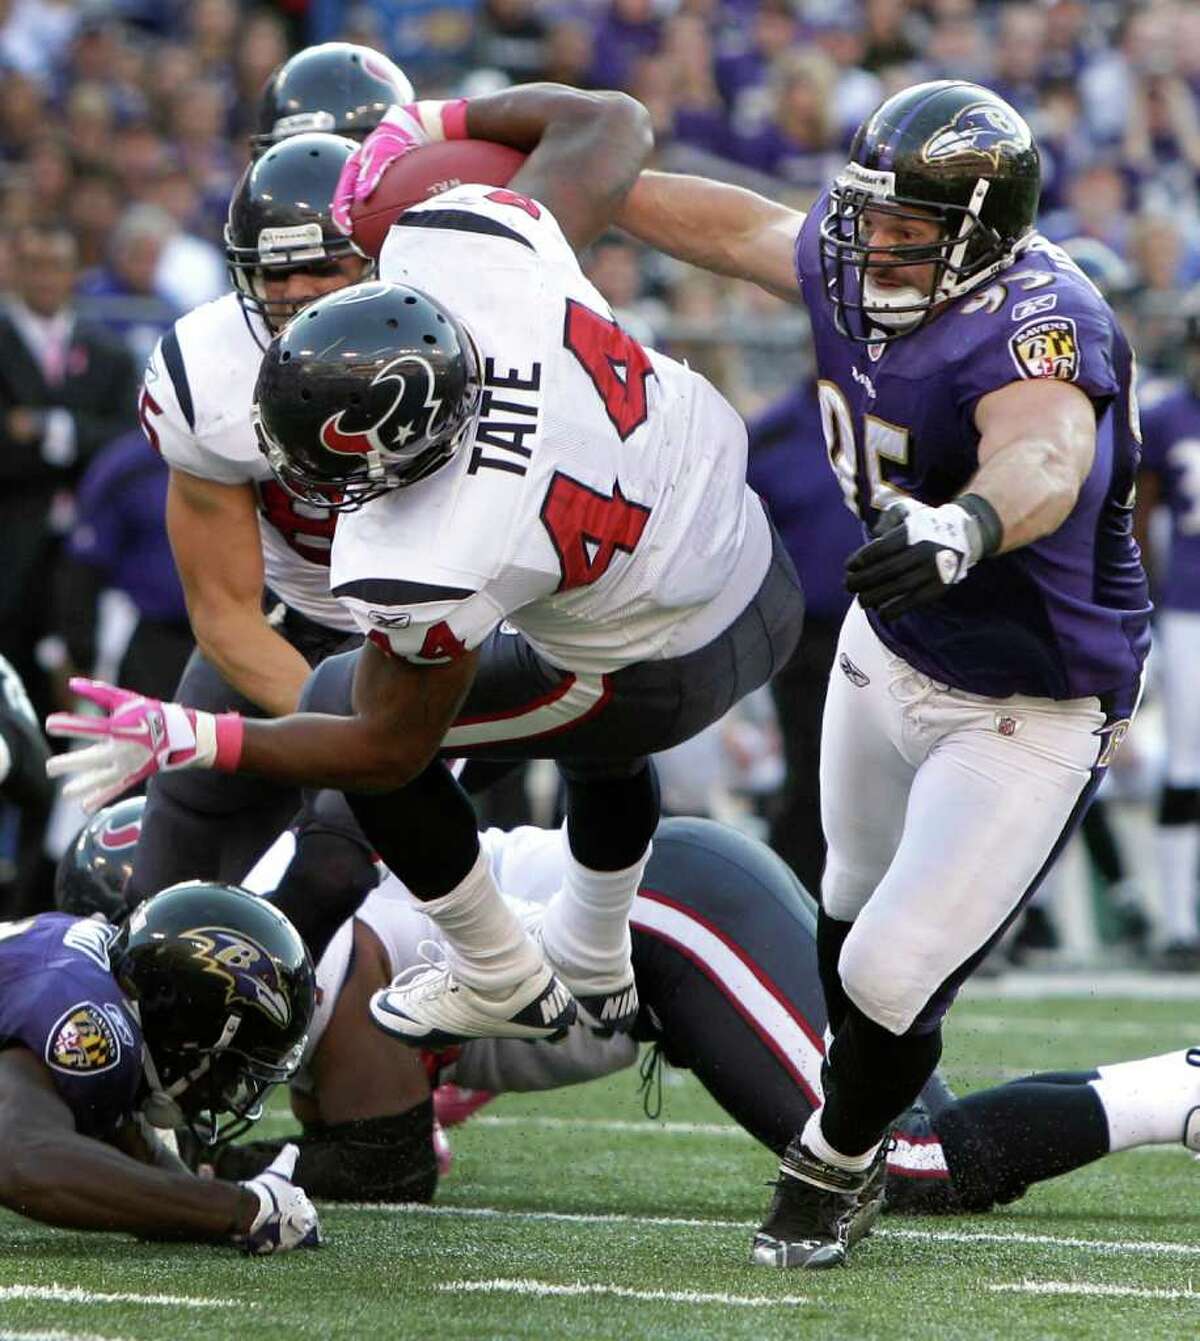 Linebacker Jarret Johnson (95) and the Baltimore defense limited Ben Tate (44) and the Texans to 90 yards rushing the last time the two teams played at M&T Bank Stadium on Oct. 16.